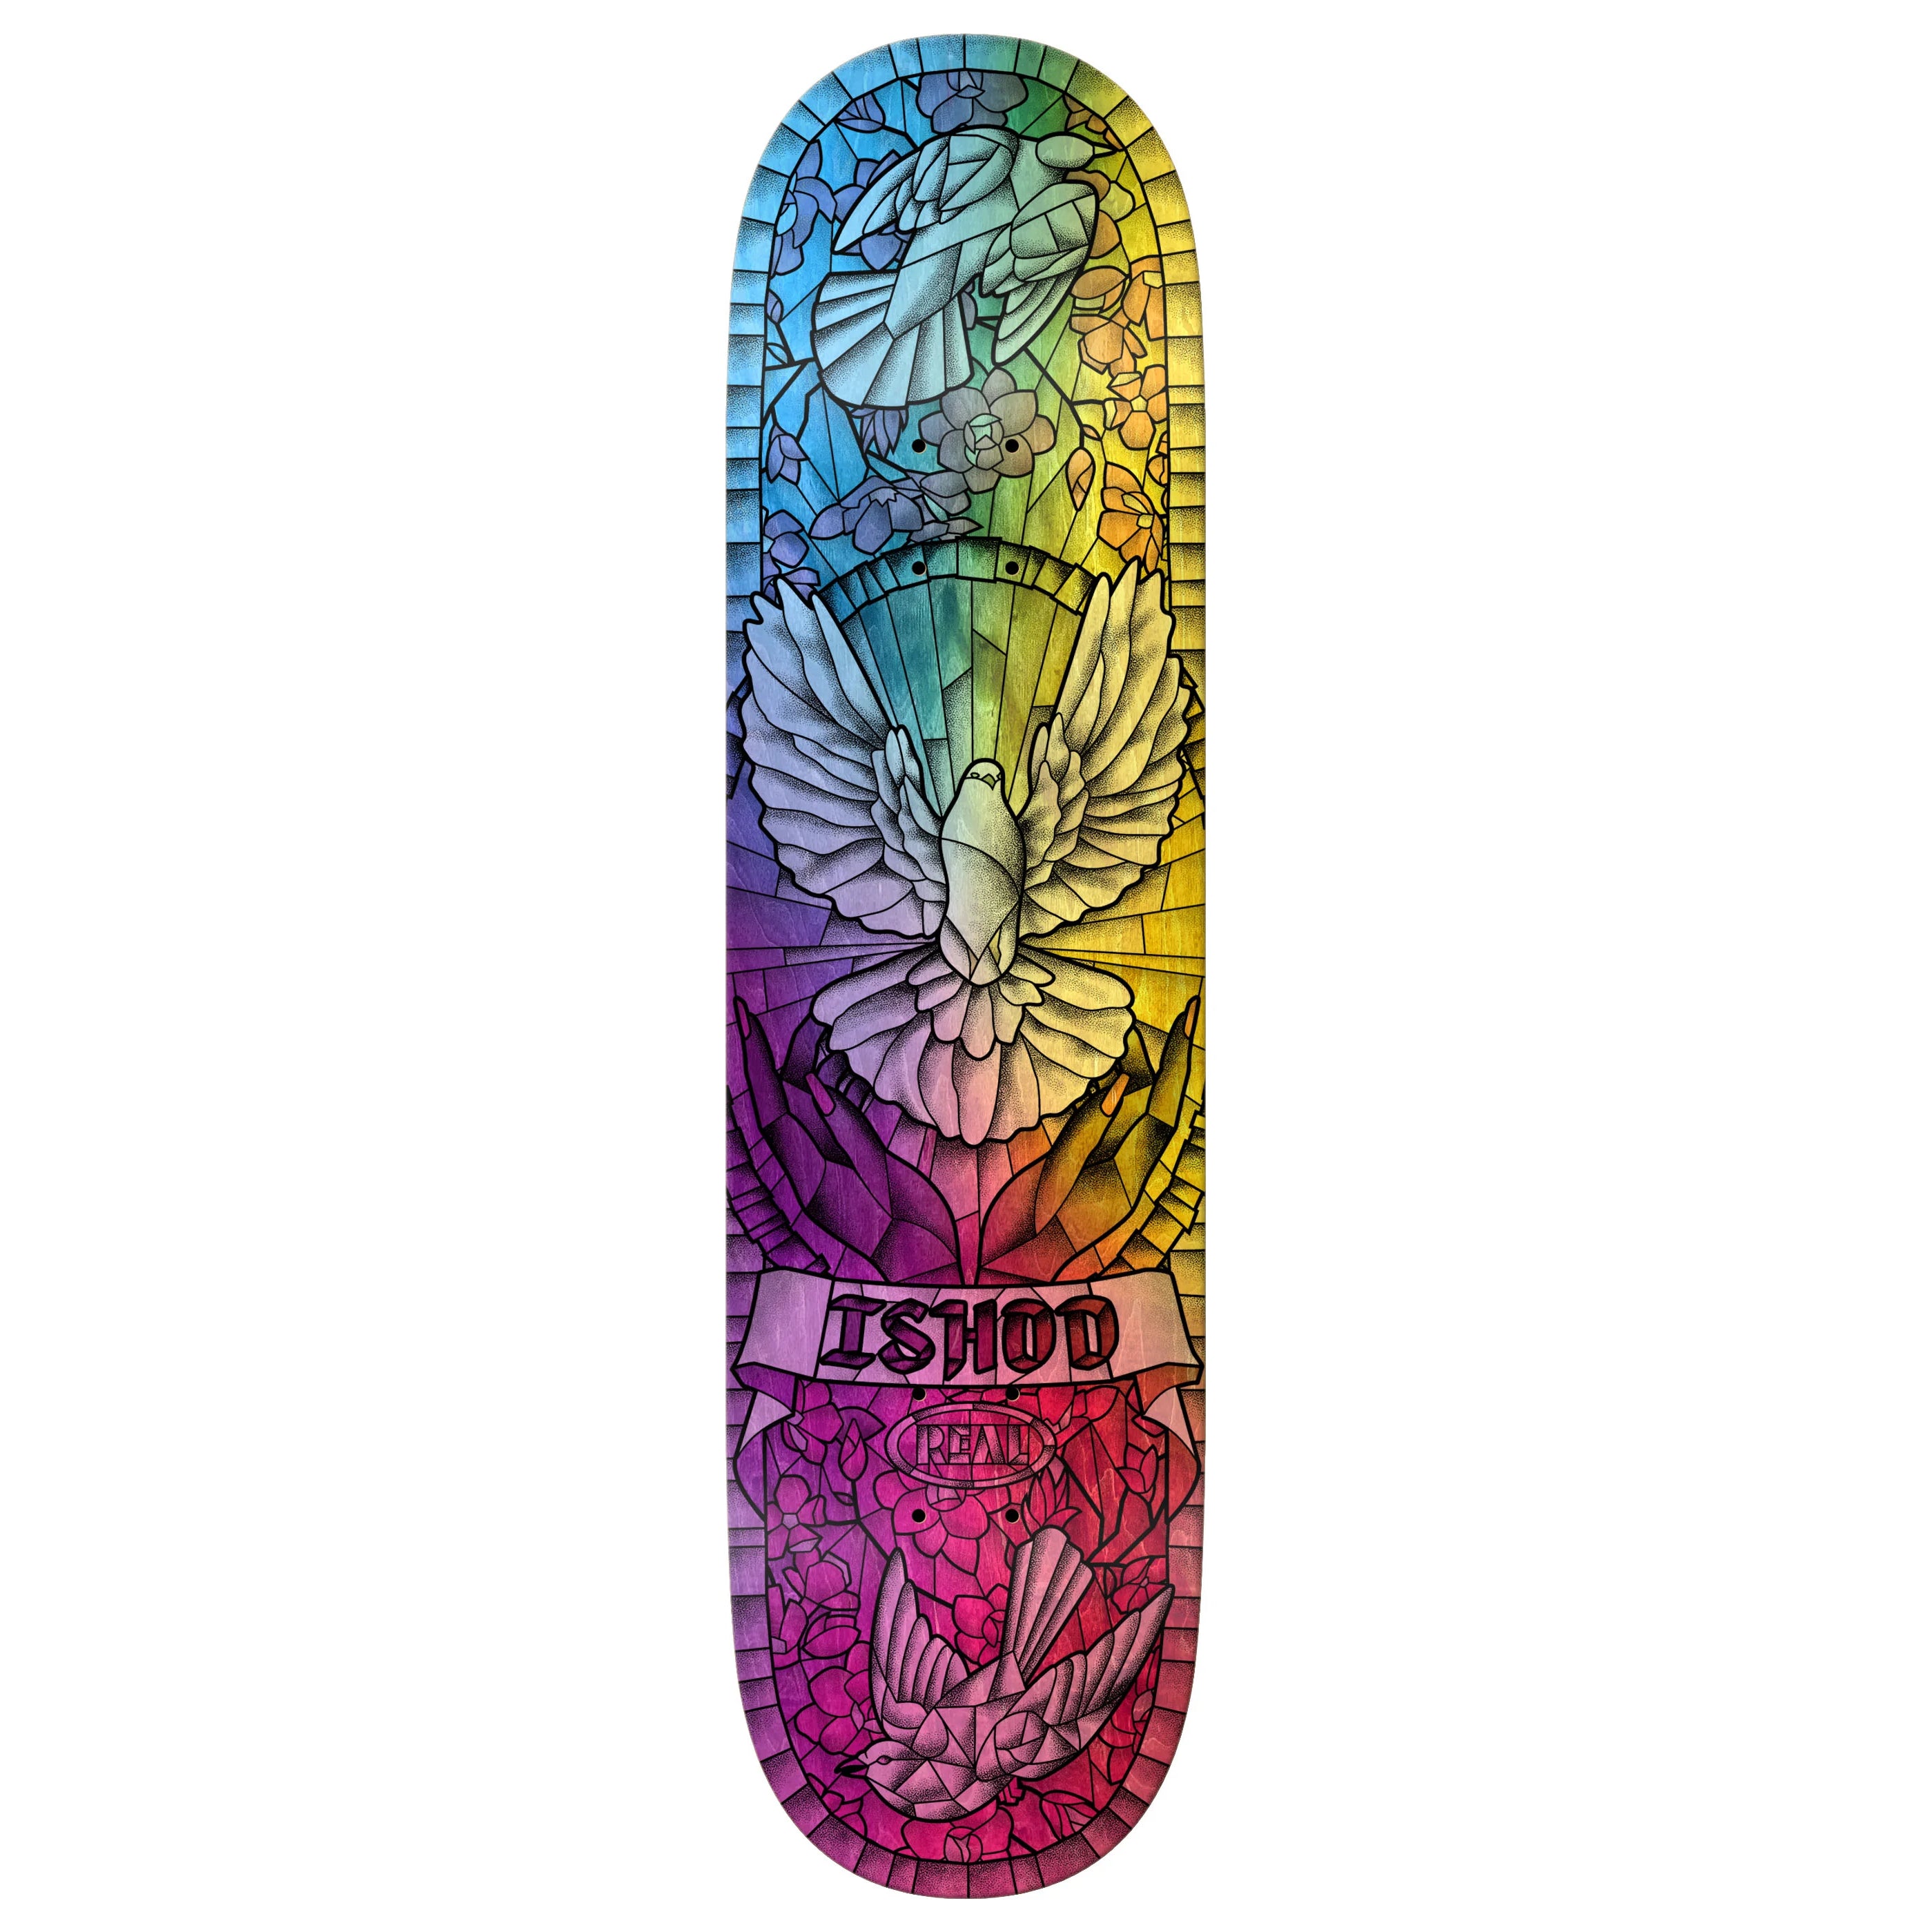 Ishod Wair Chromatic Cathedral Real Skateboard Deck